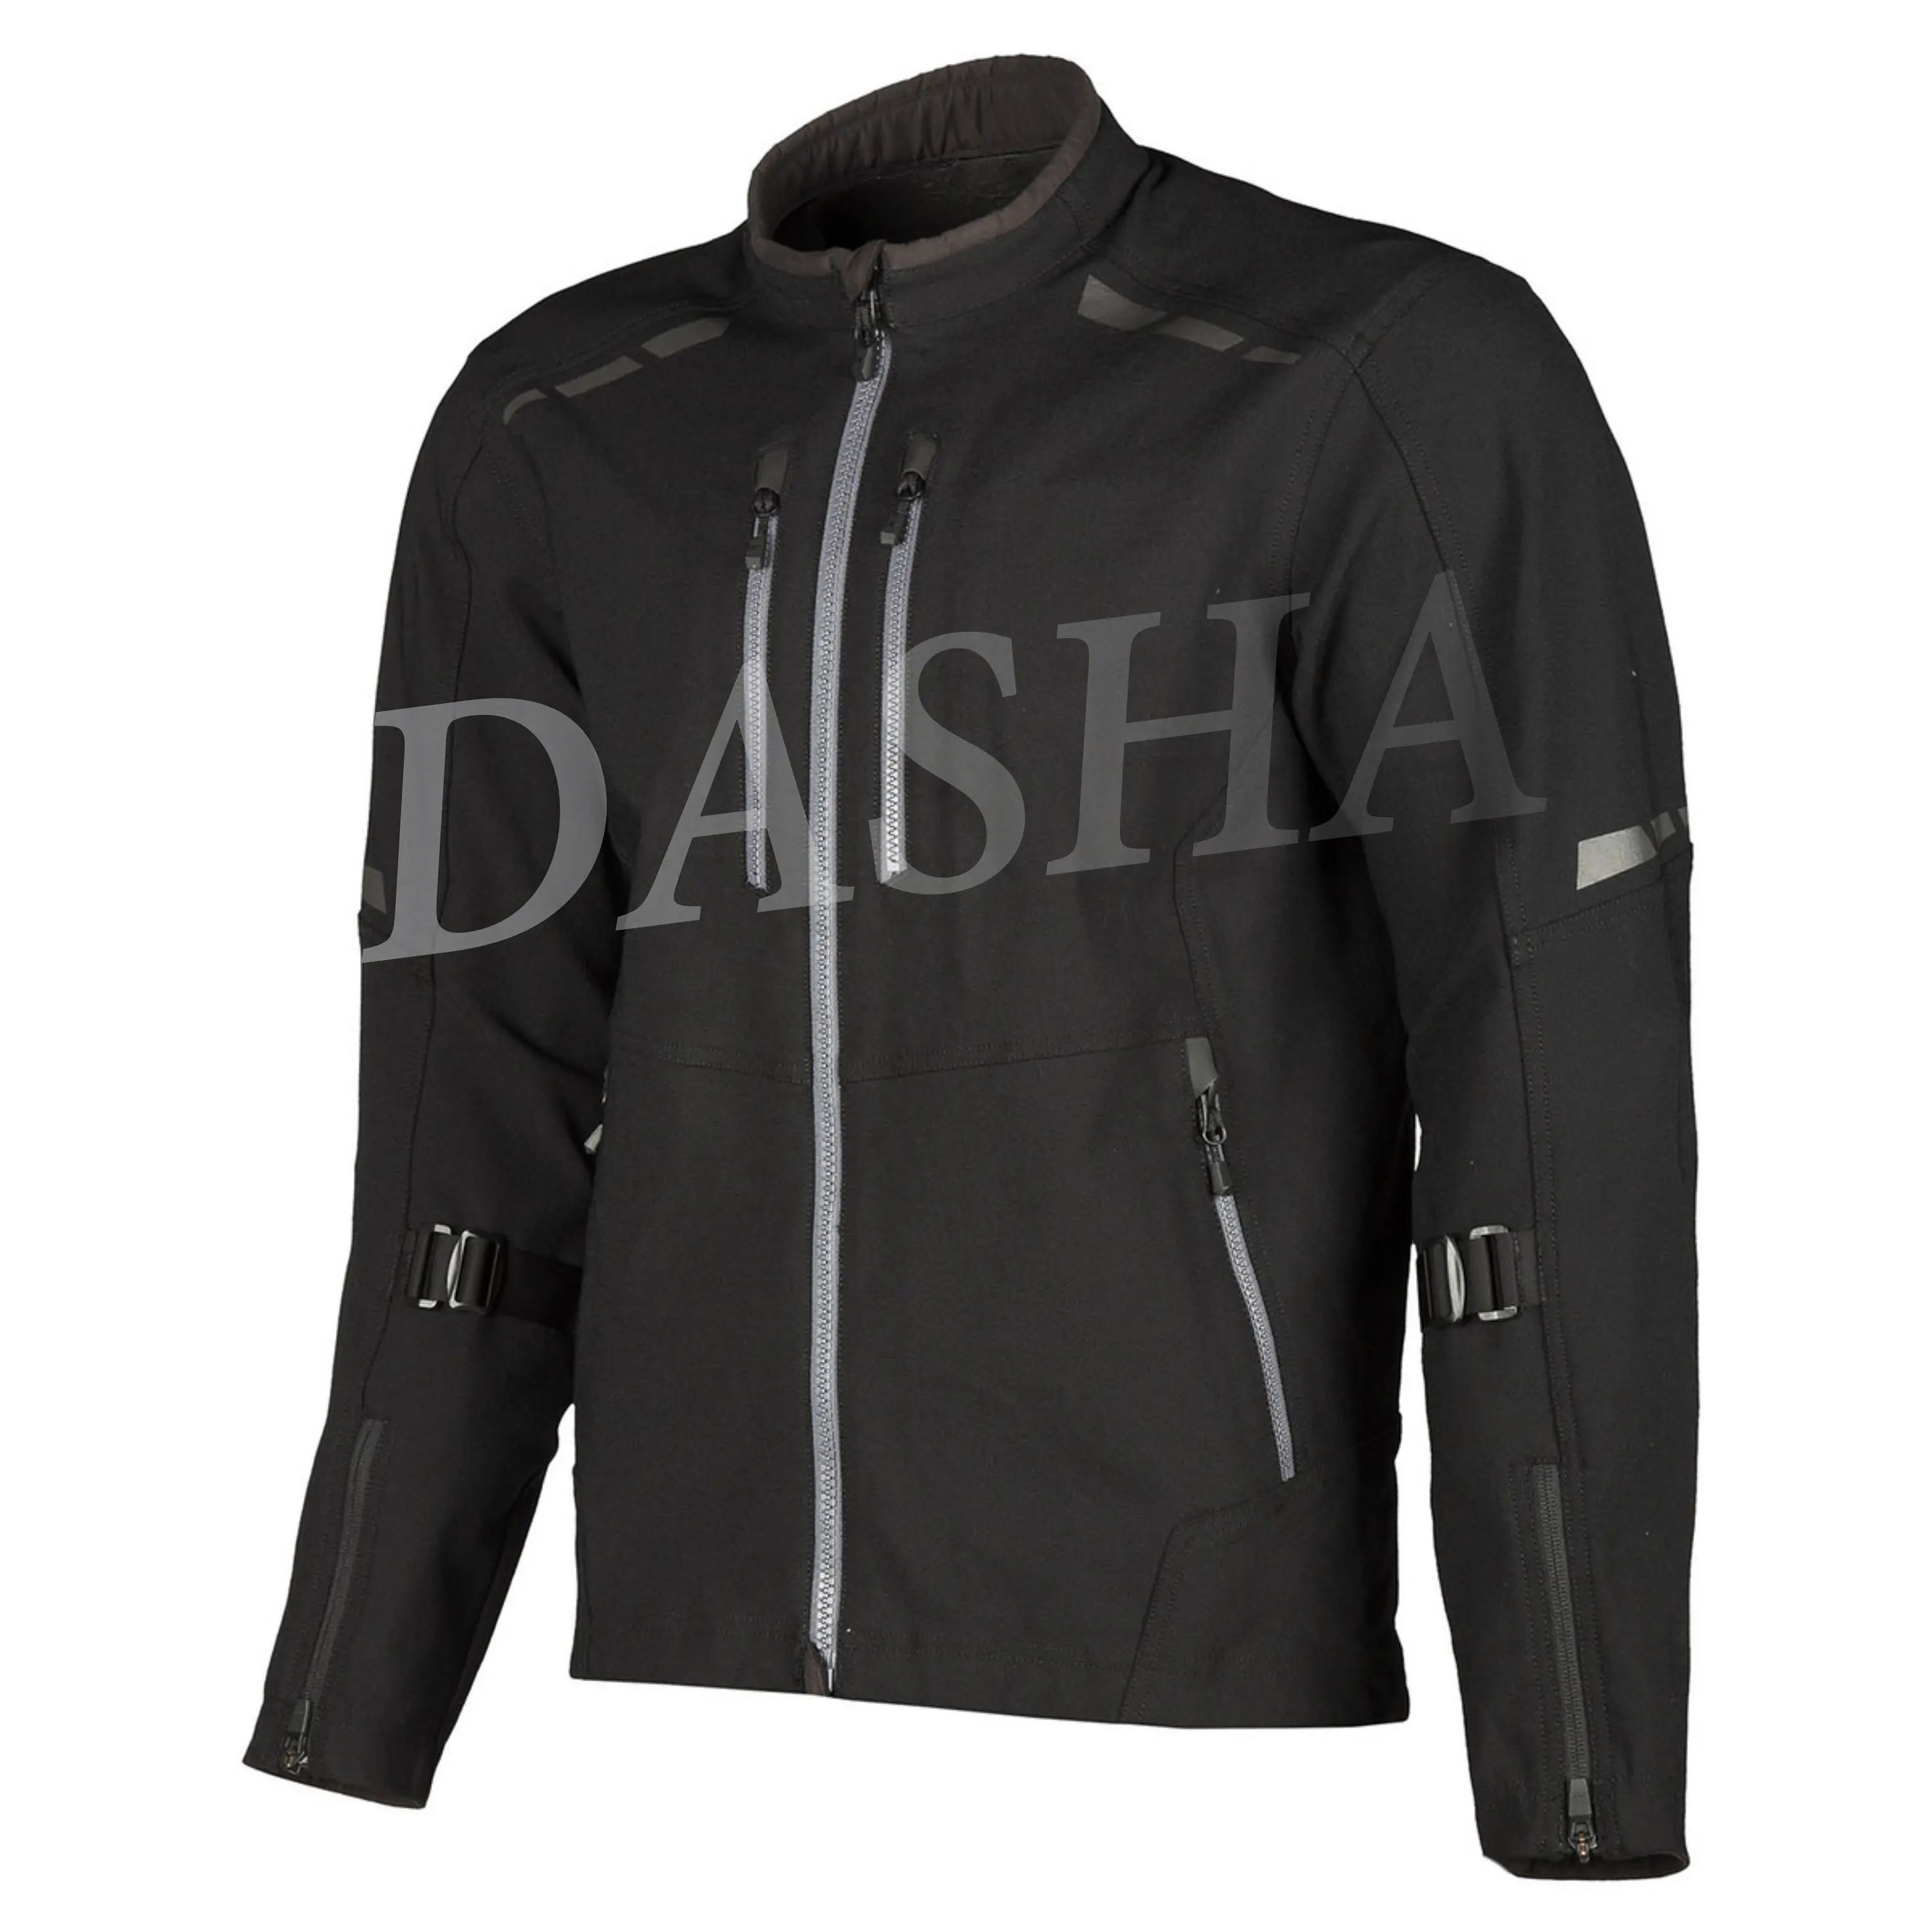 High Quality Solid Colour Men's Outerwear CE Protector with Reflective Material Rabat IV Motorcycle Jacket for Riders